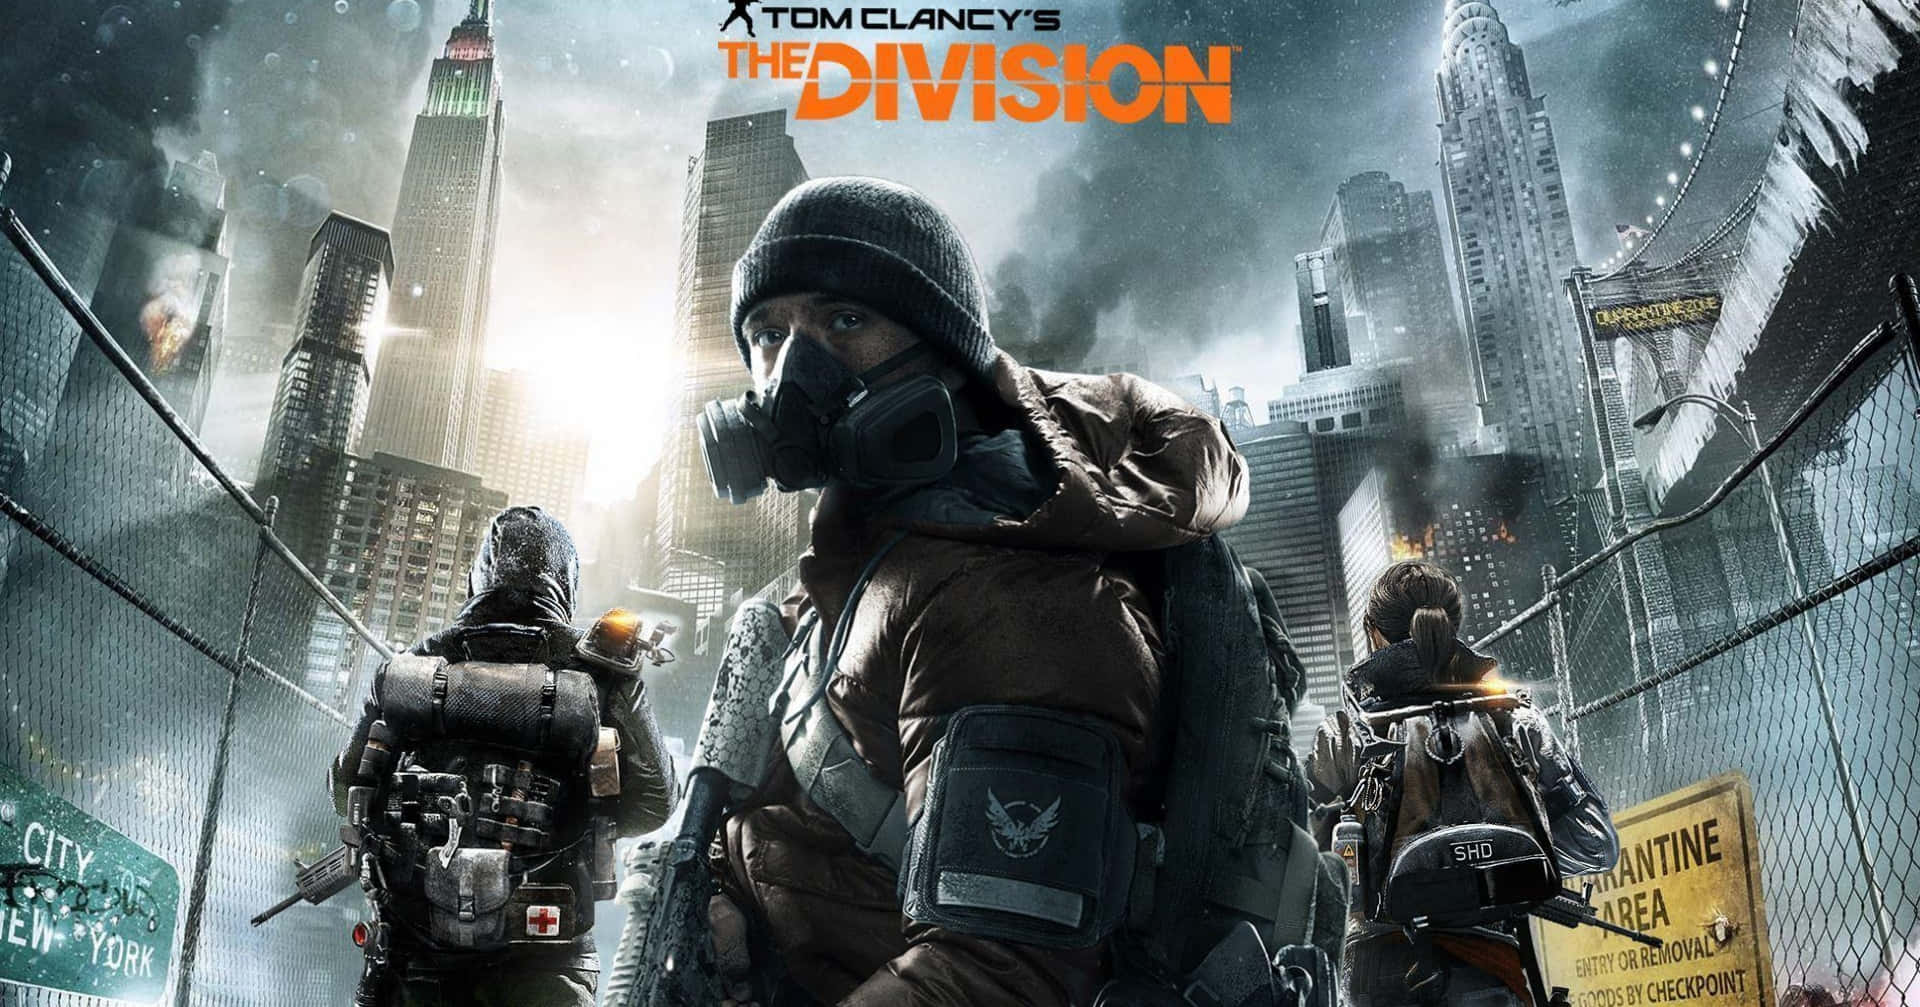 The Division Pc Game Poster Wallpaper